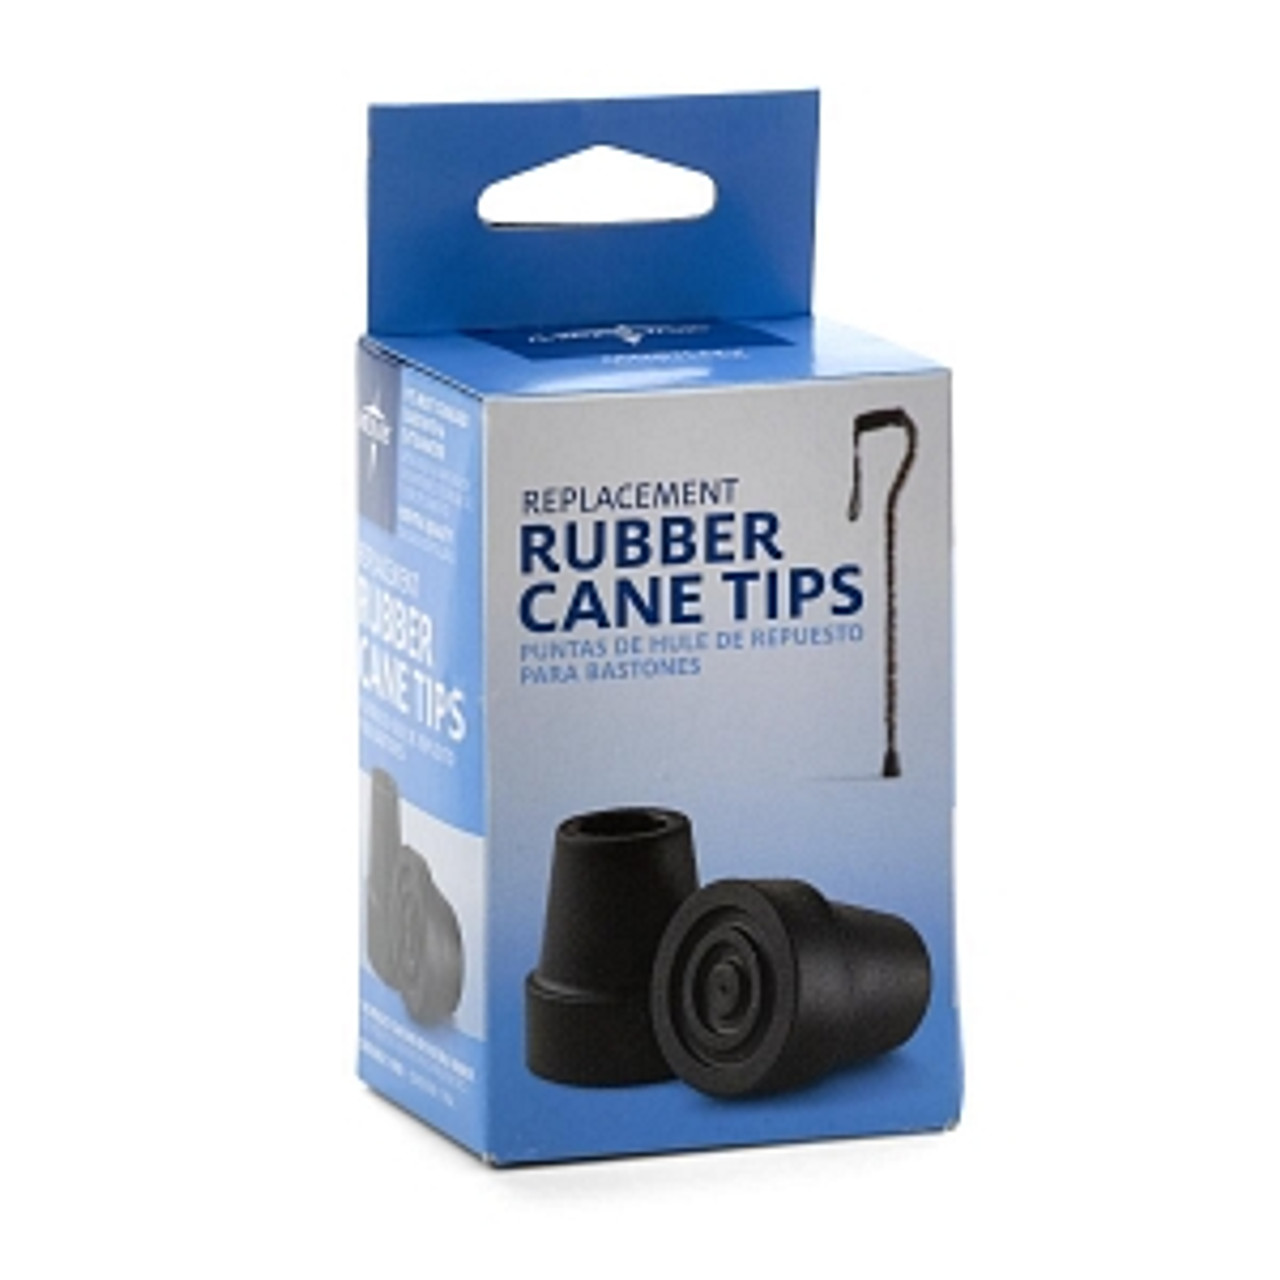 Replacement rubber tips for canes
Long-wear